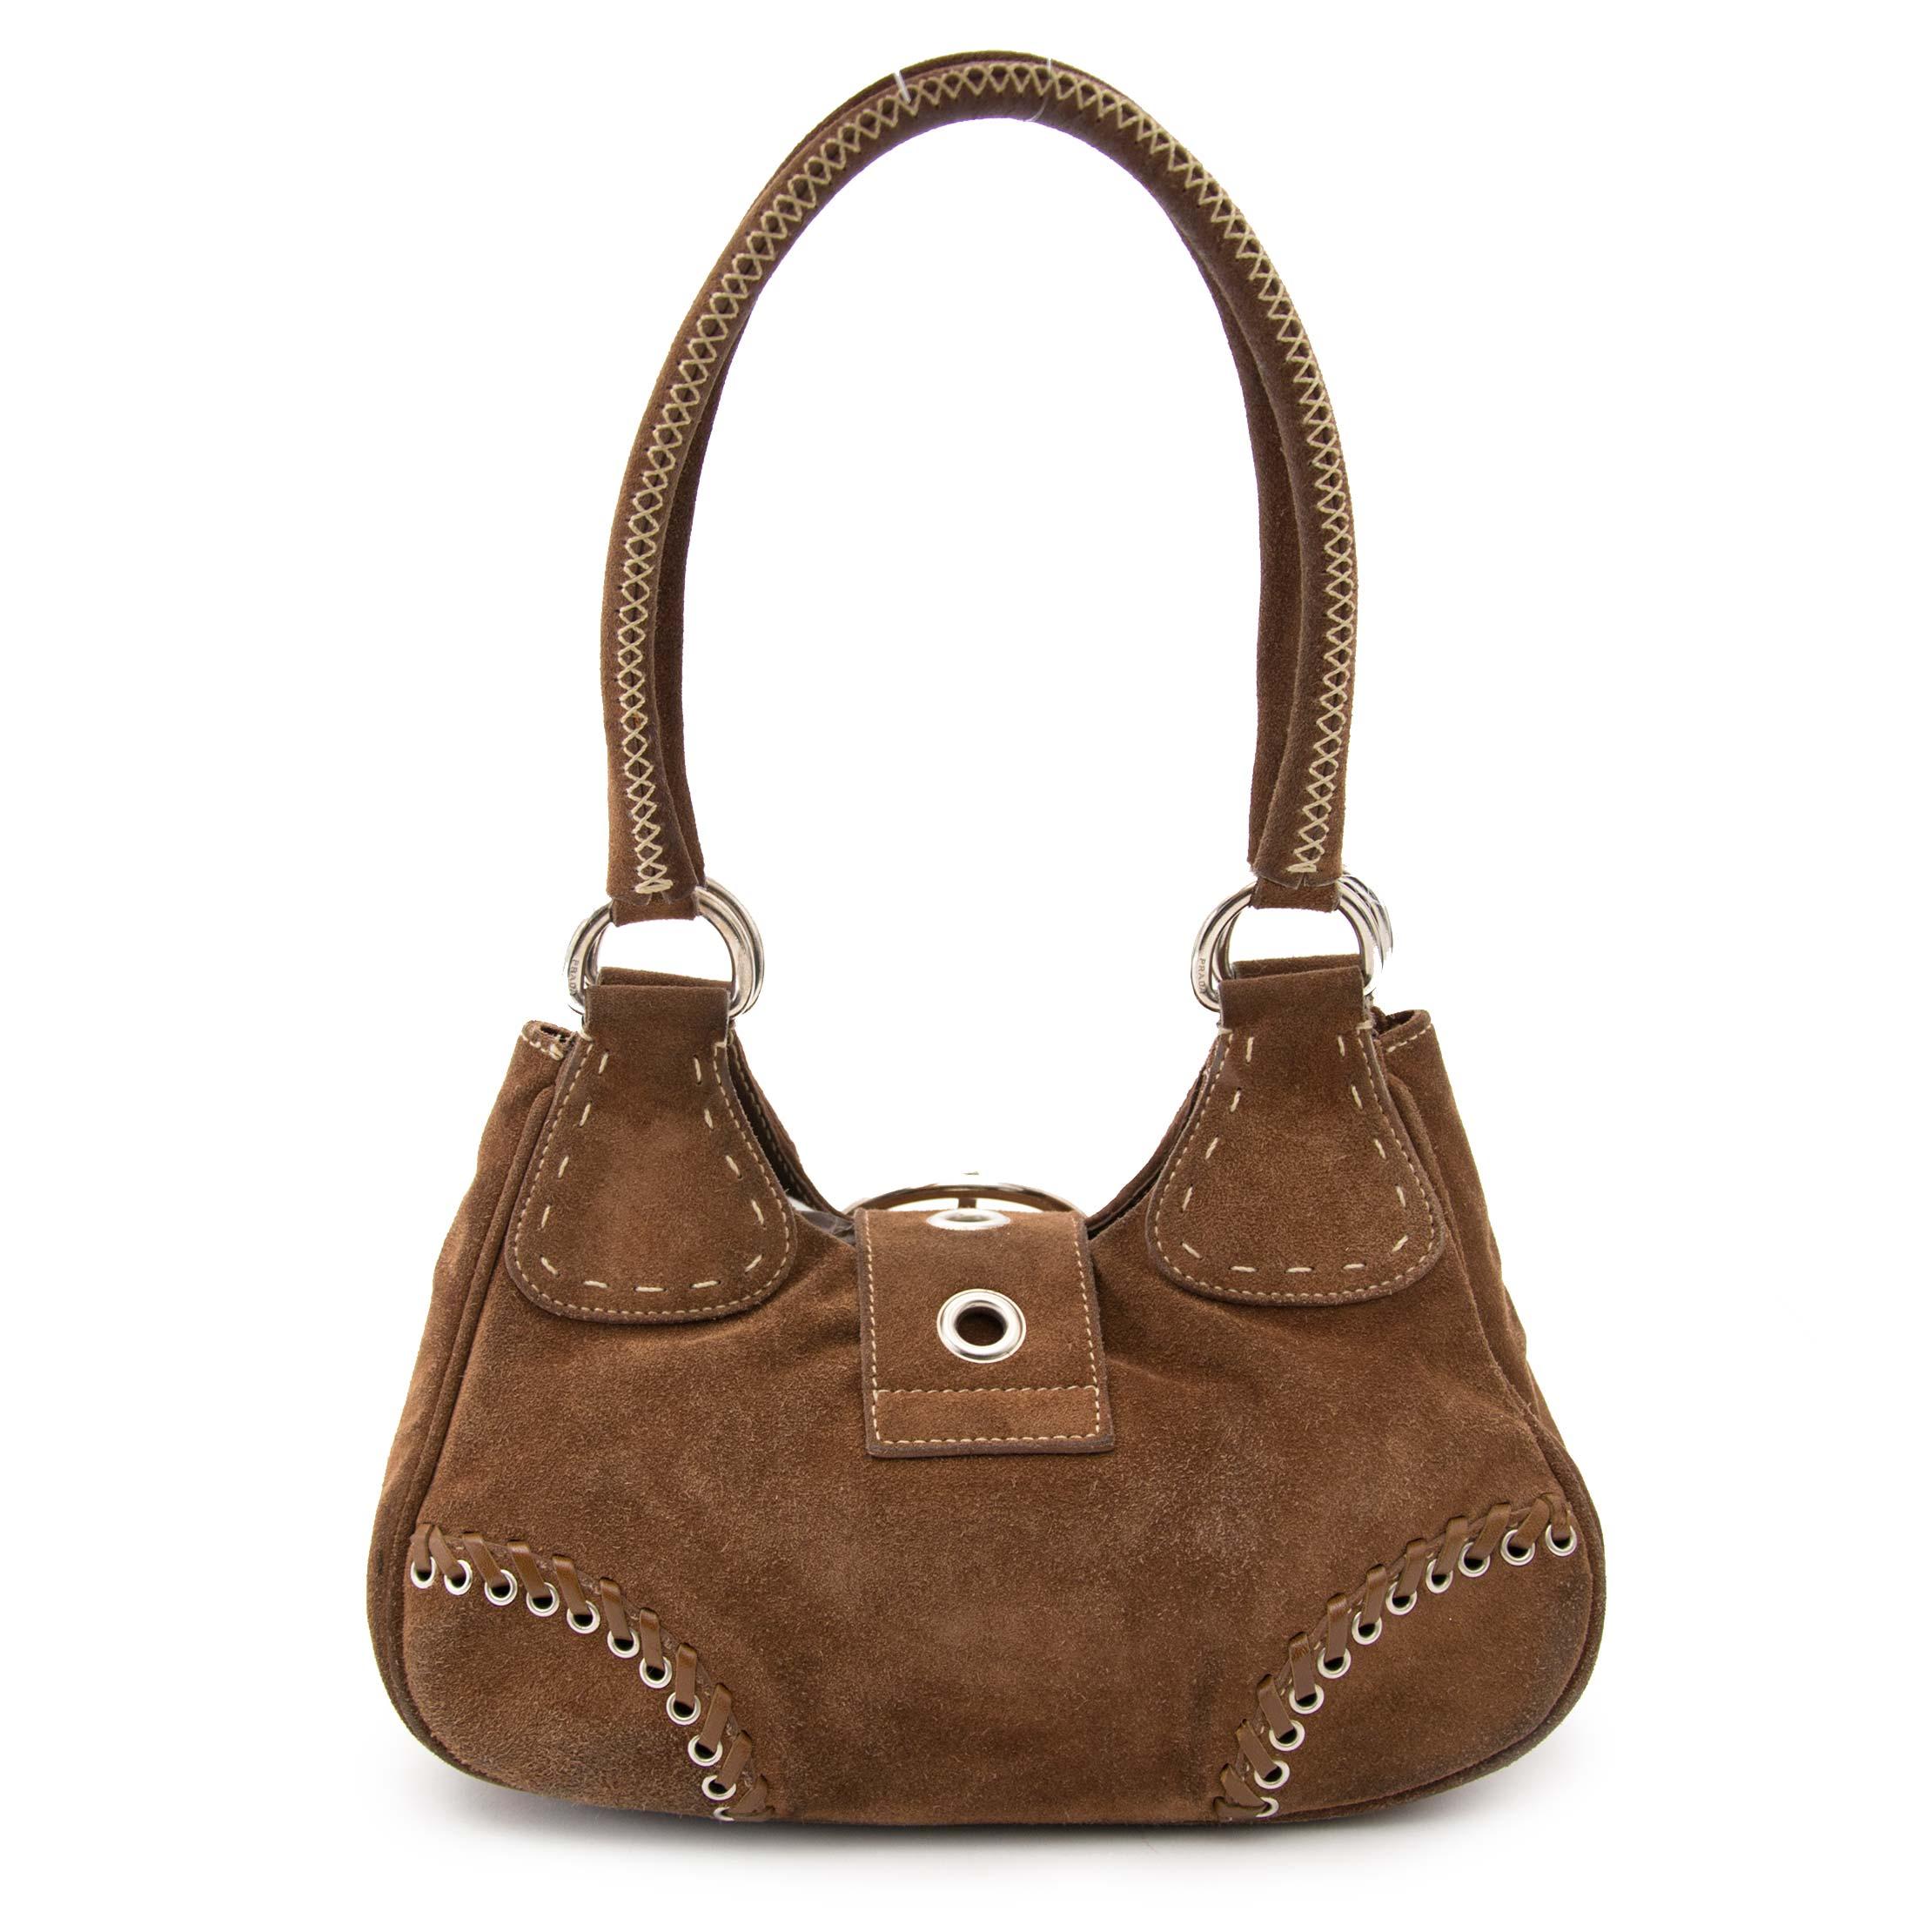 The model Shoulder Bag  is one of the most famous reference from the luxury House . Declined in many colors and materials, here it is offered in Brown Daim and Silver hardware. This product is rated as condition A. That means the product is in Very